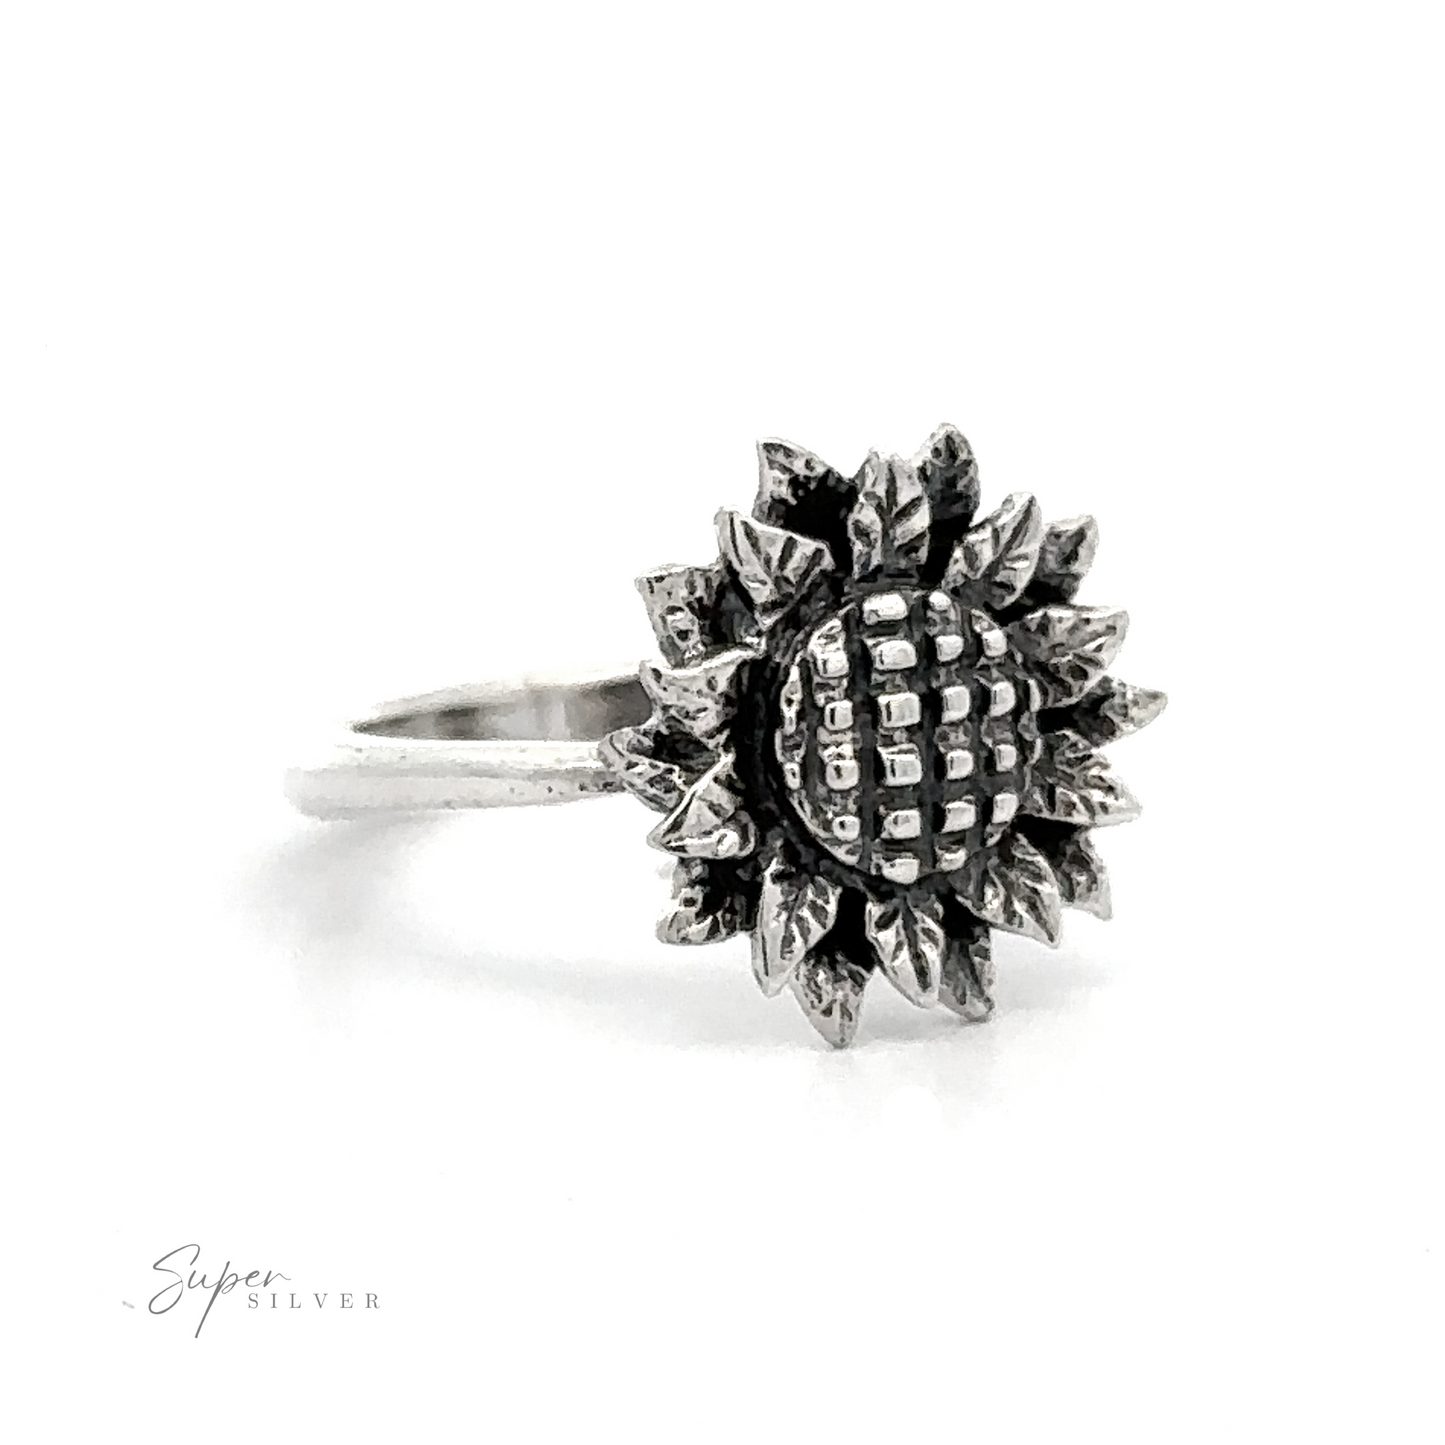 A Silver Sunflower Ring with detailed petals and textured center on a white background.